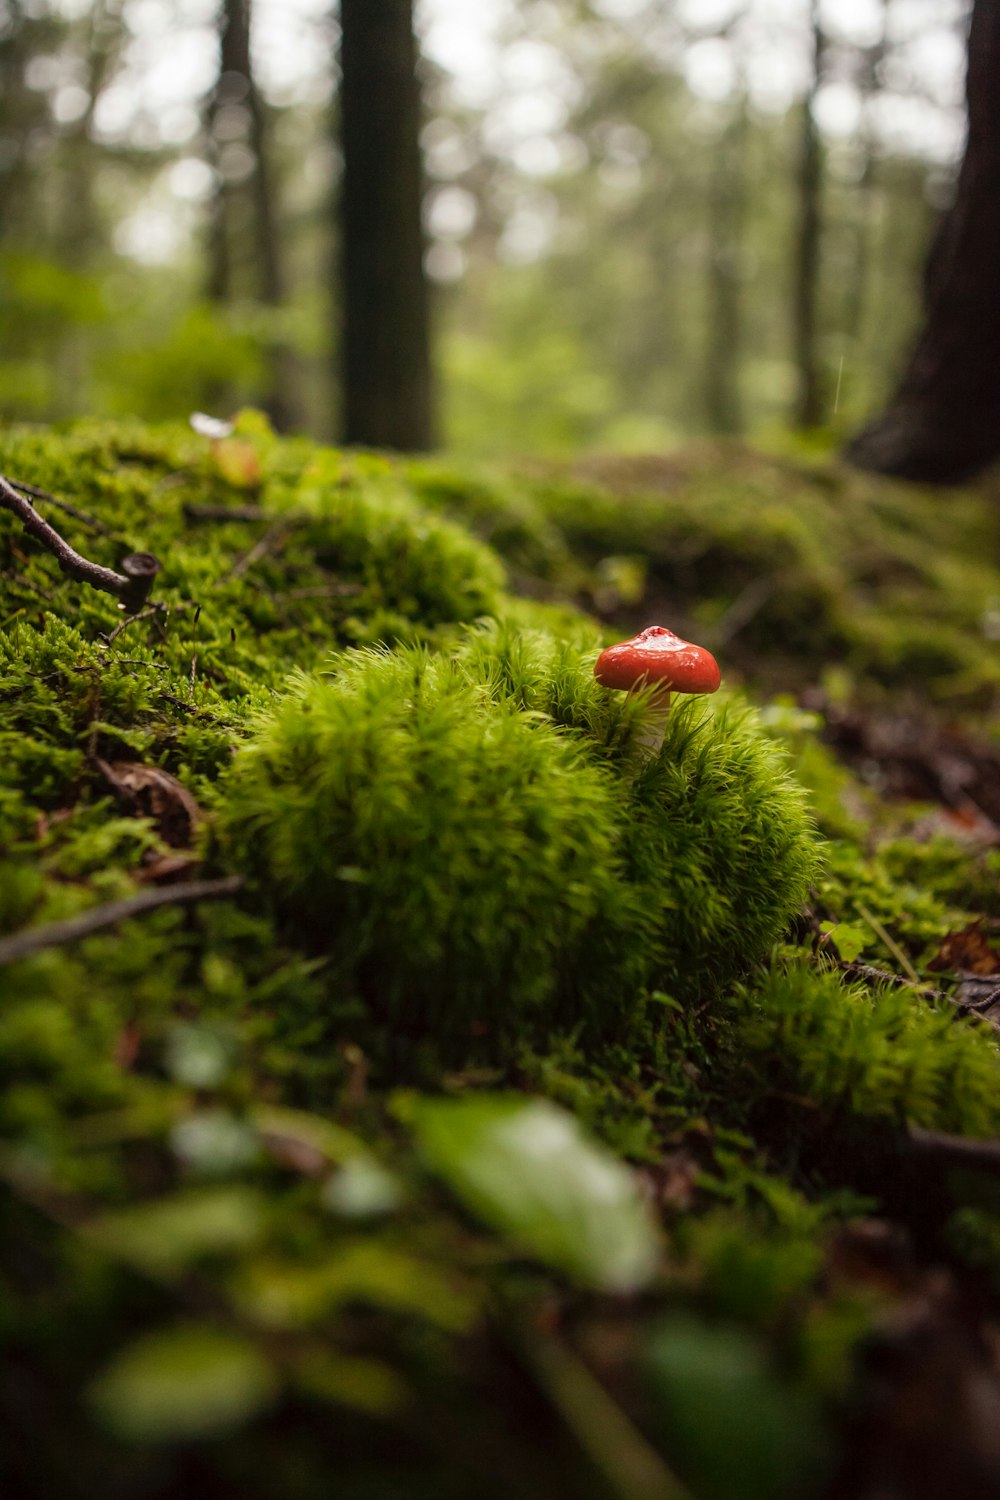 red mushroom growing on green grass at daytime